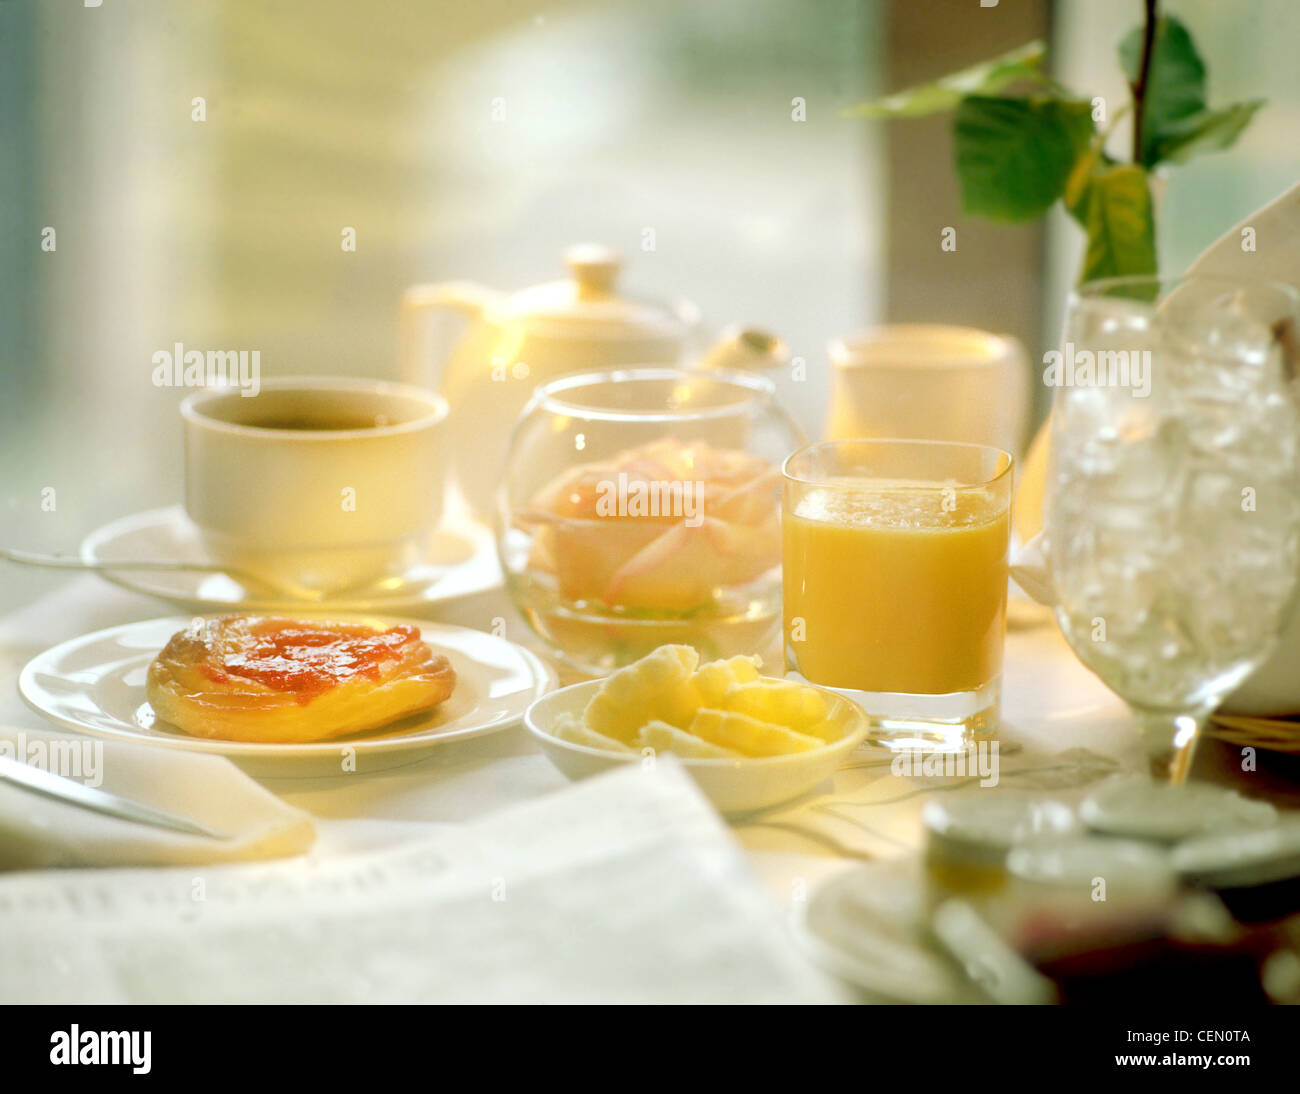 Continental Breakfast, room service at a hotel, spa, pastry with orange juice and tea, empty glass with ice and rose in bowl Stock Photo